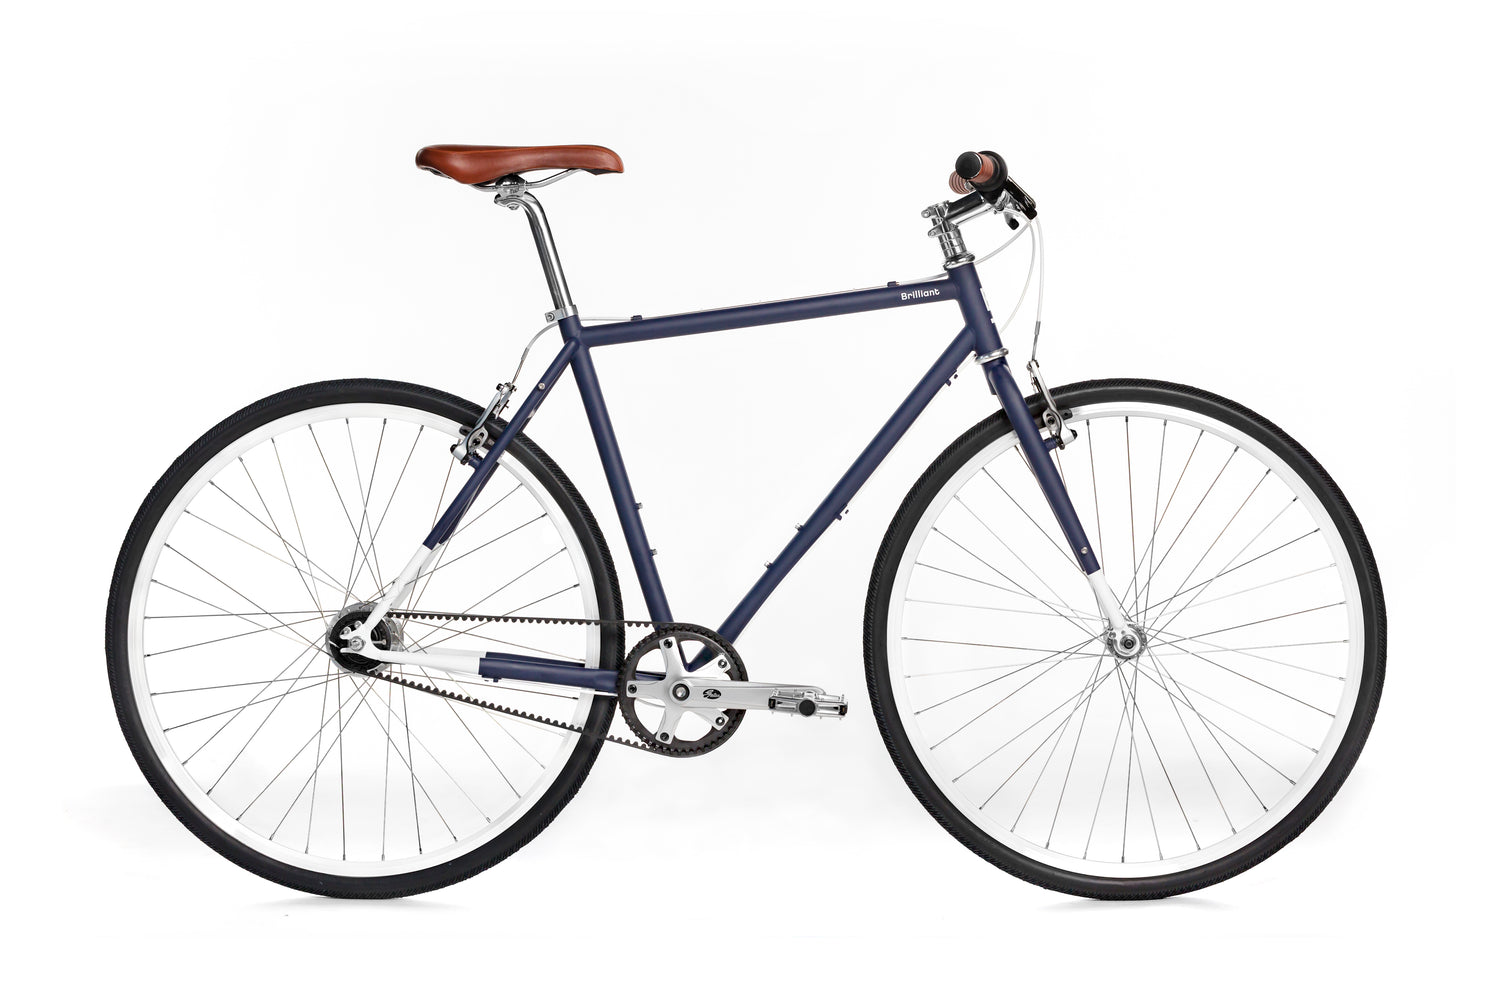 The new L Train commuter bicycle in dark blue